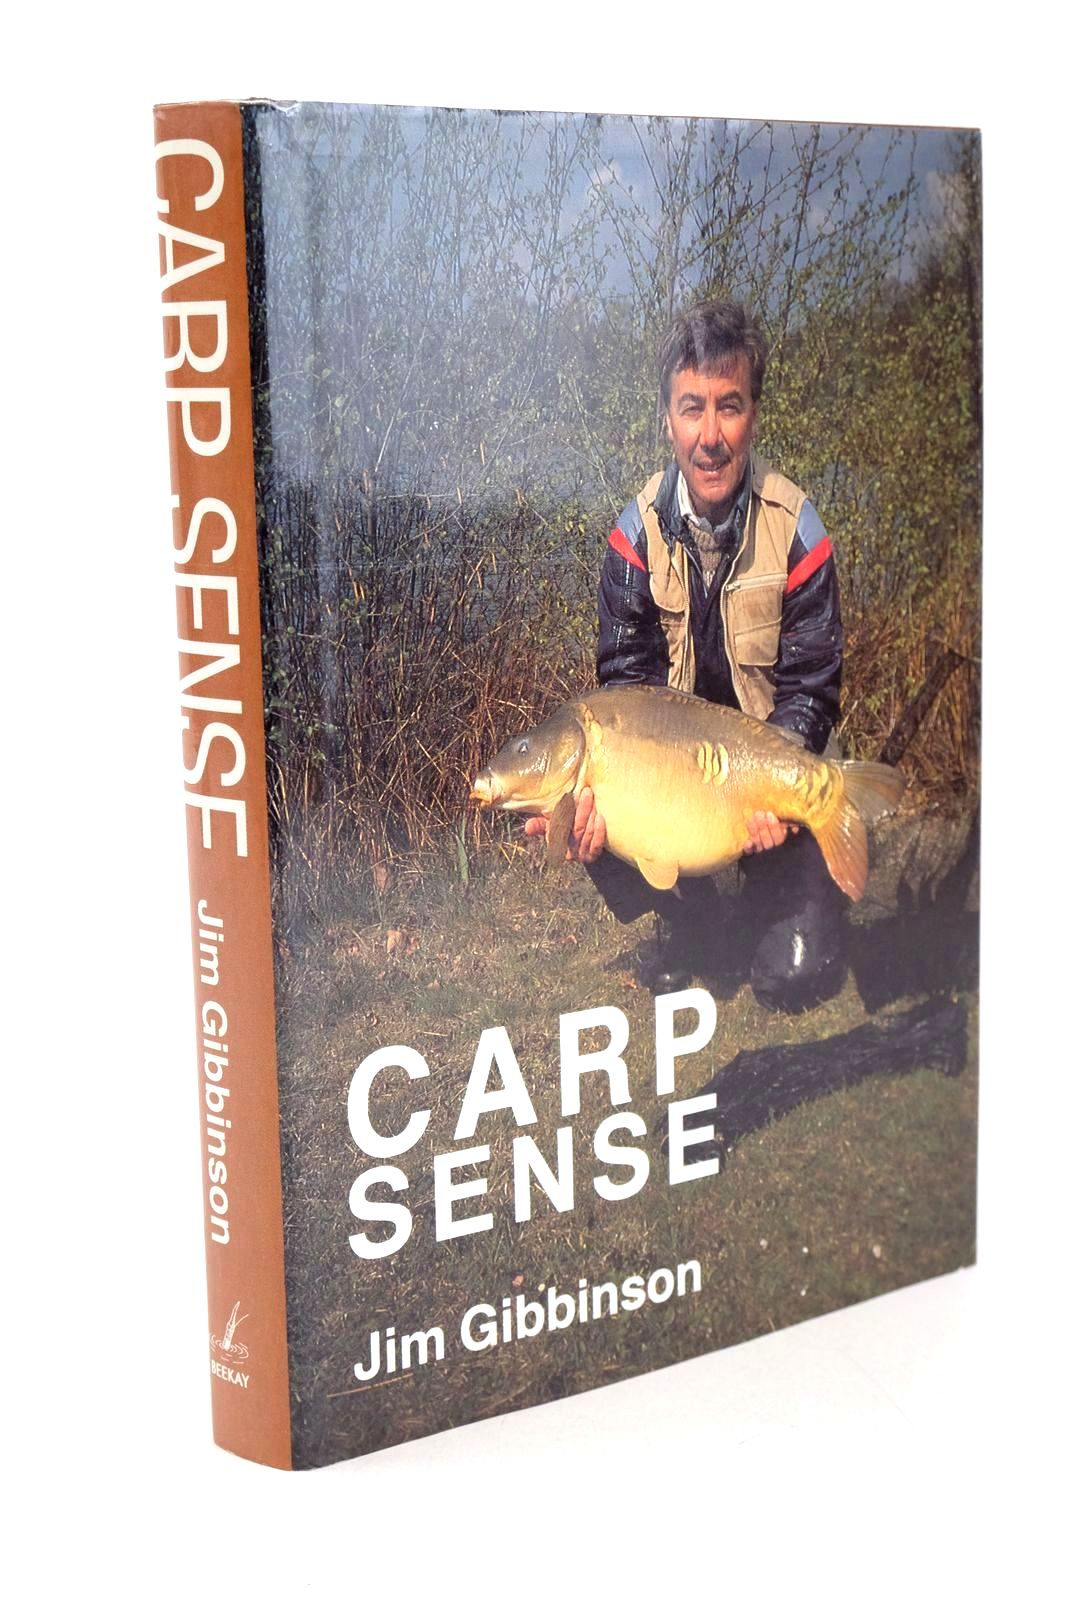 Photo of CARP SENSE written by Gibbinson, Jim published by Beekay Publishers (STOCK CODE: 1327605)  for sale by Stella & Rose's Books